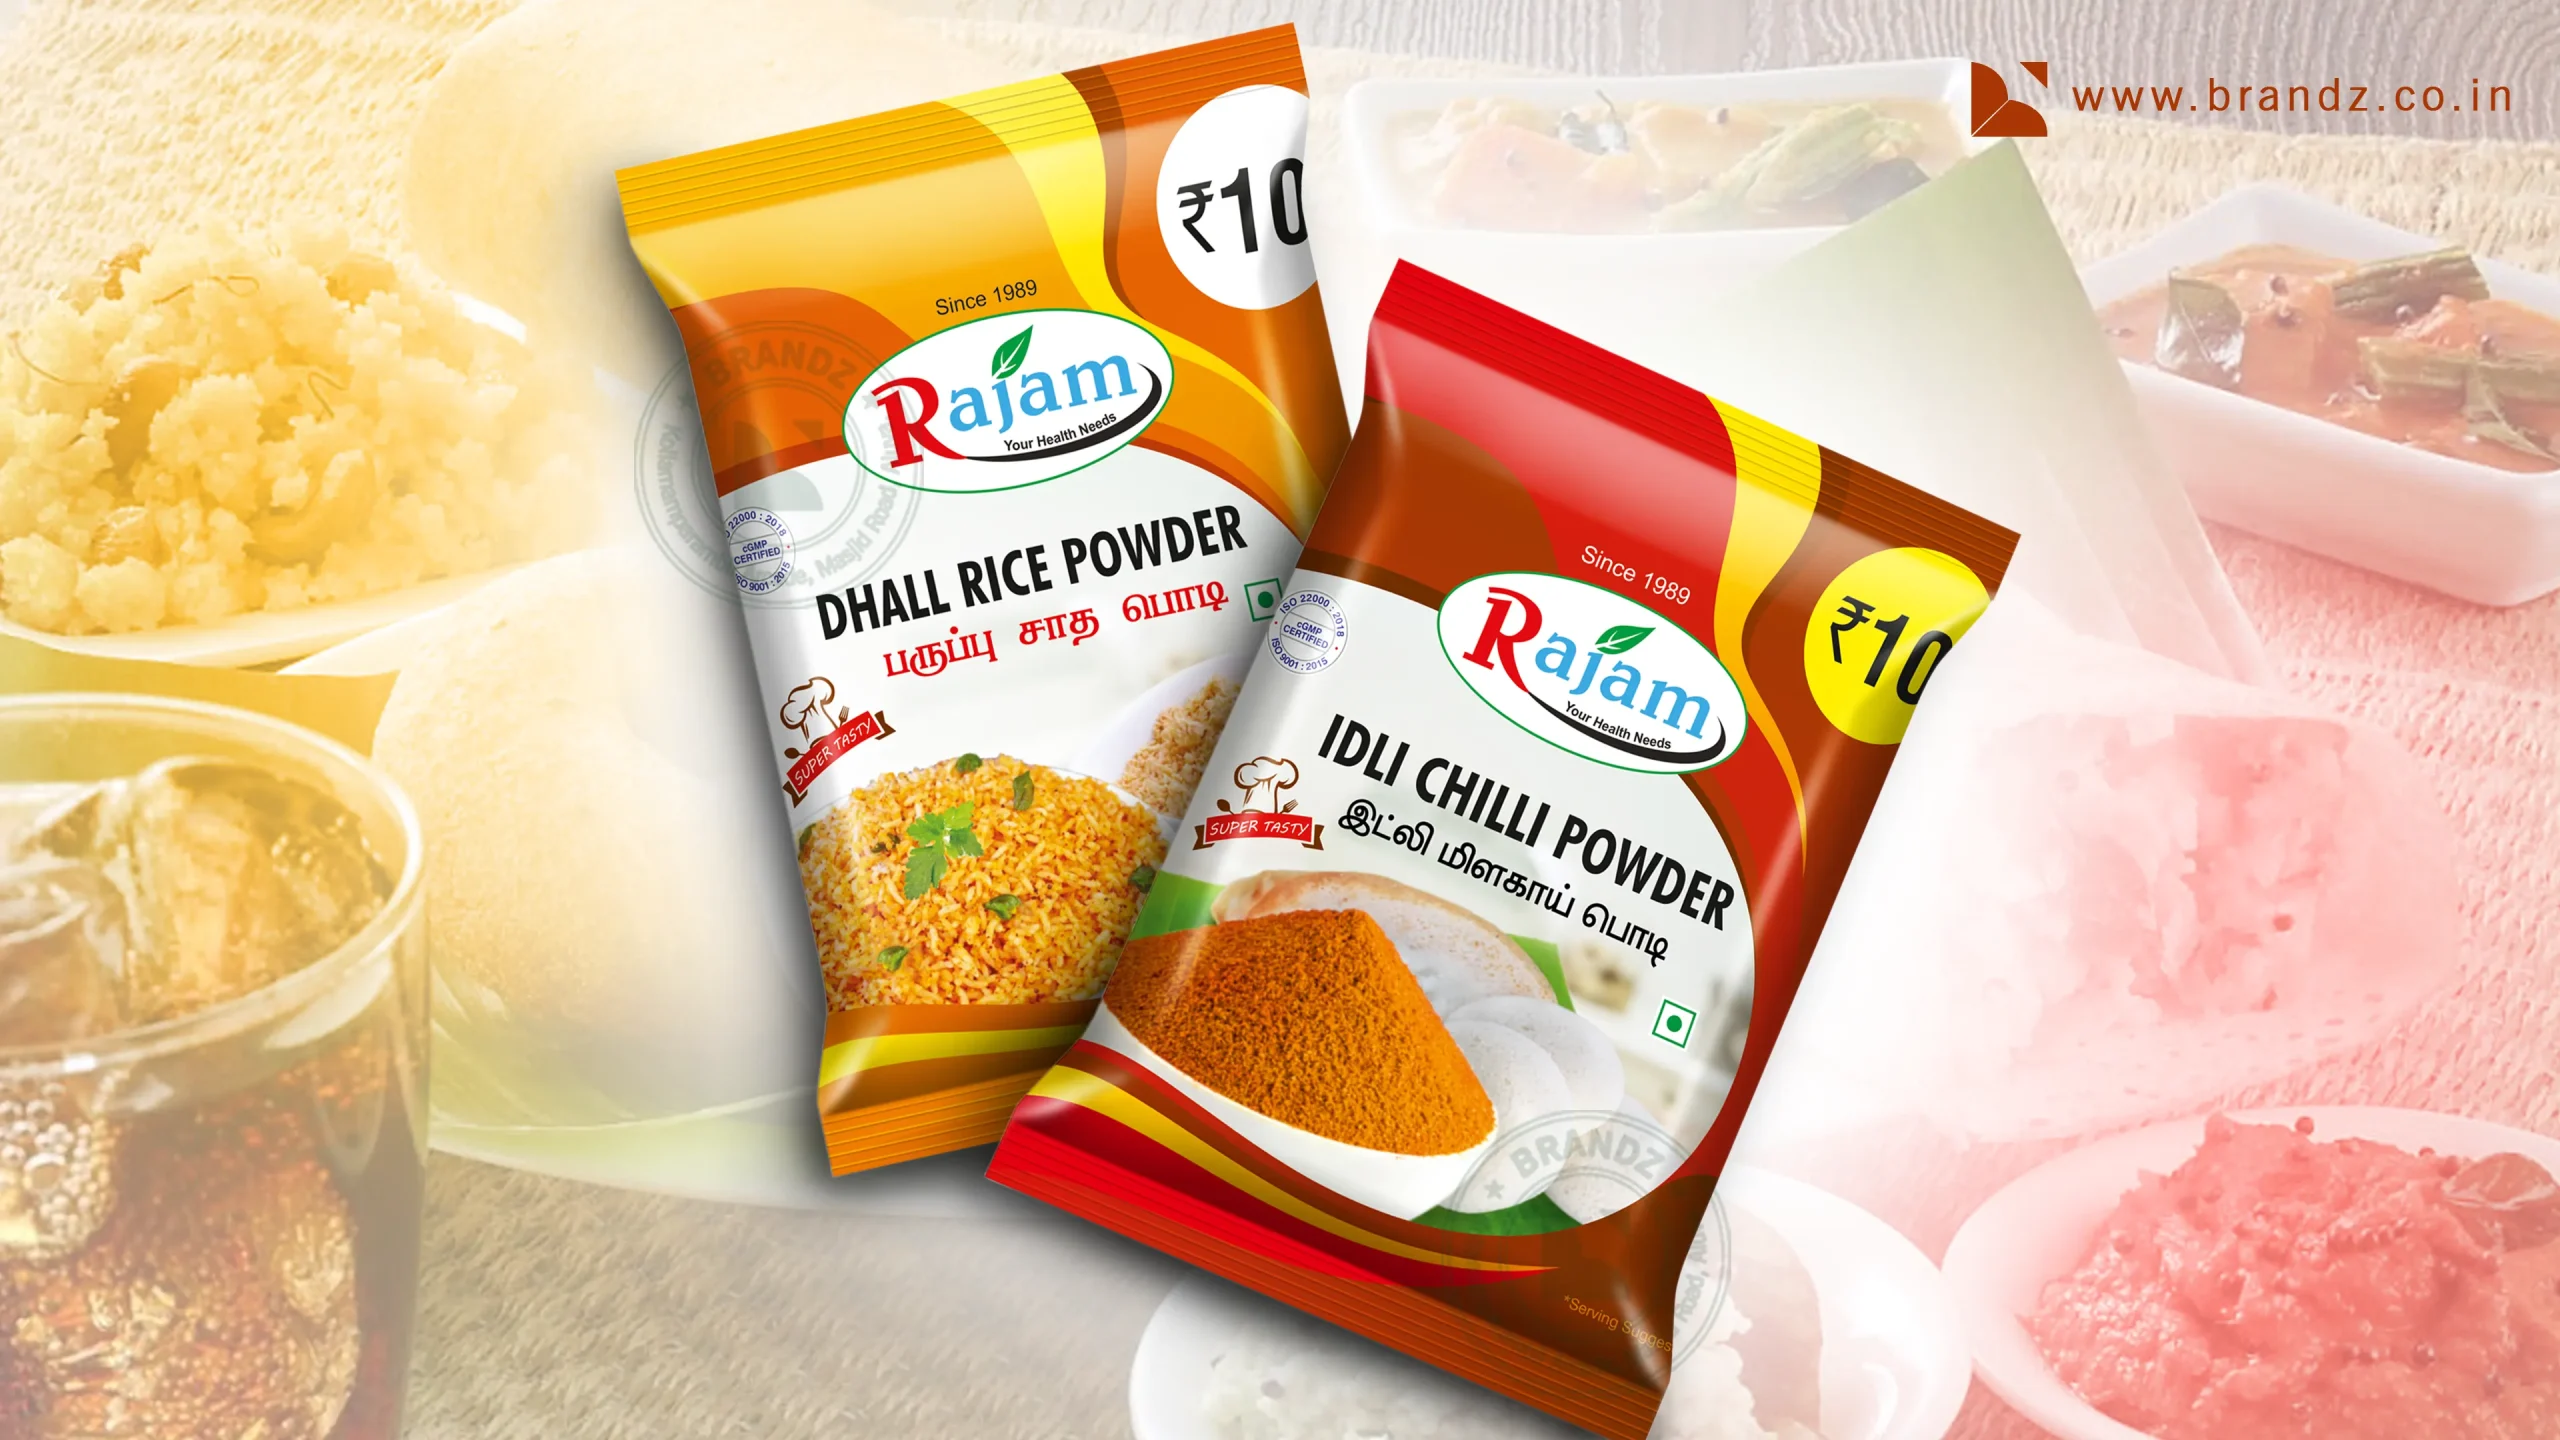 Rajam dhall rice powder and idly chilly powder Pouch